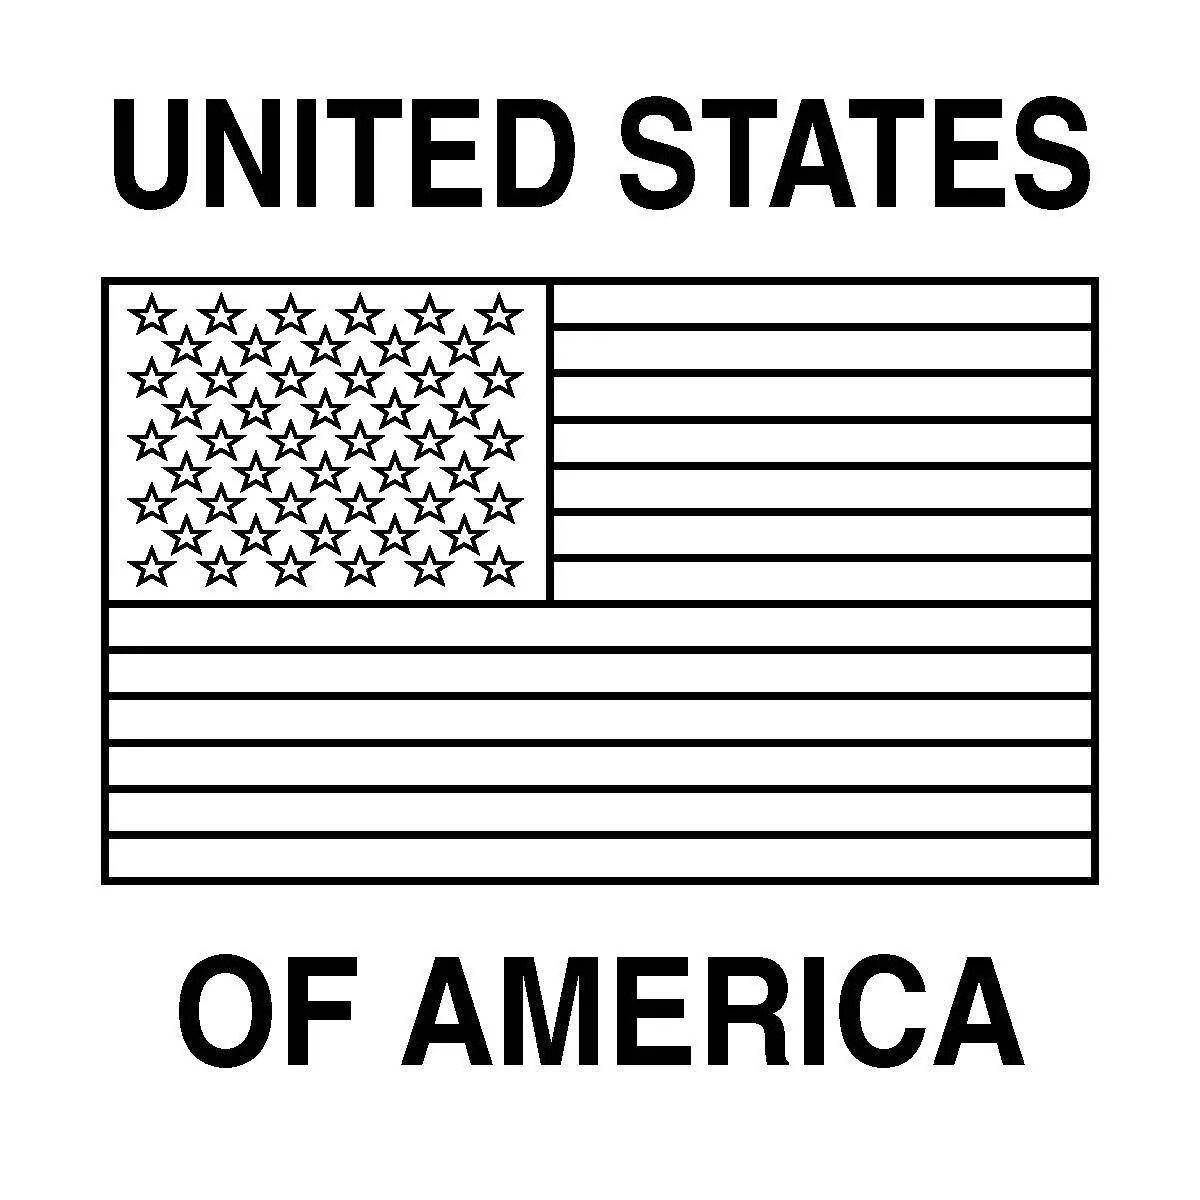 Brightly colored usa flag coloring page